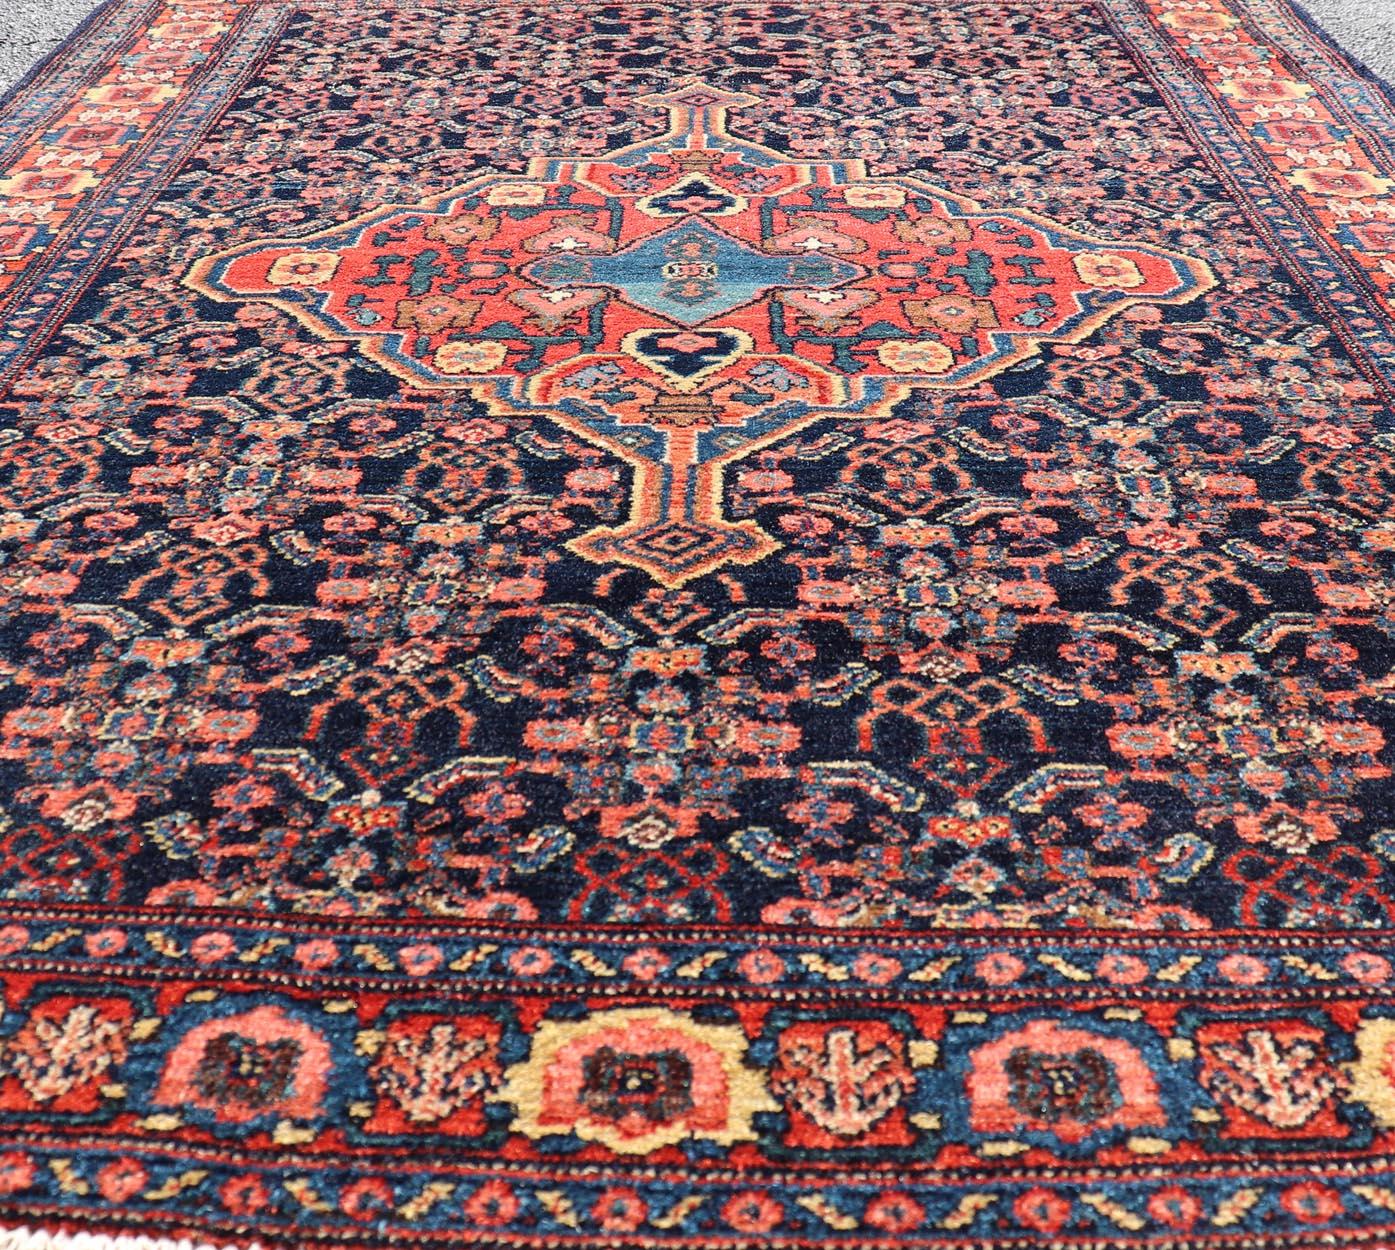 Antique Persian Senneh Rug with Unique Medallion and All-Over Design. Keivan Woven Arts/ rug AVI-1101, country of origin / type: Iran / Senneh, circa 1900
Measures: 3'6 x 4'10 
This incredibly finely woven antique Persian Senneh rug was handwoven